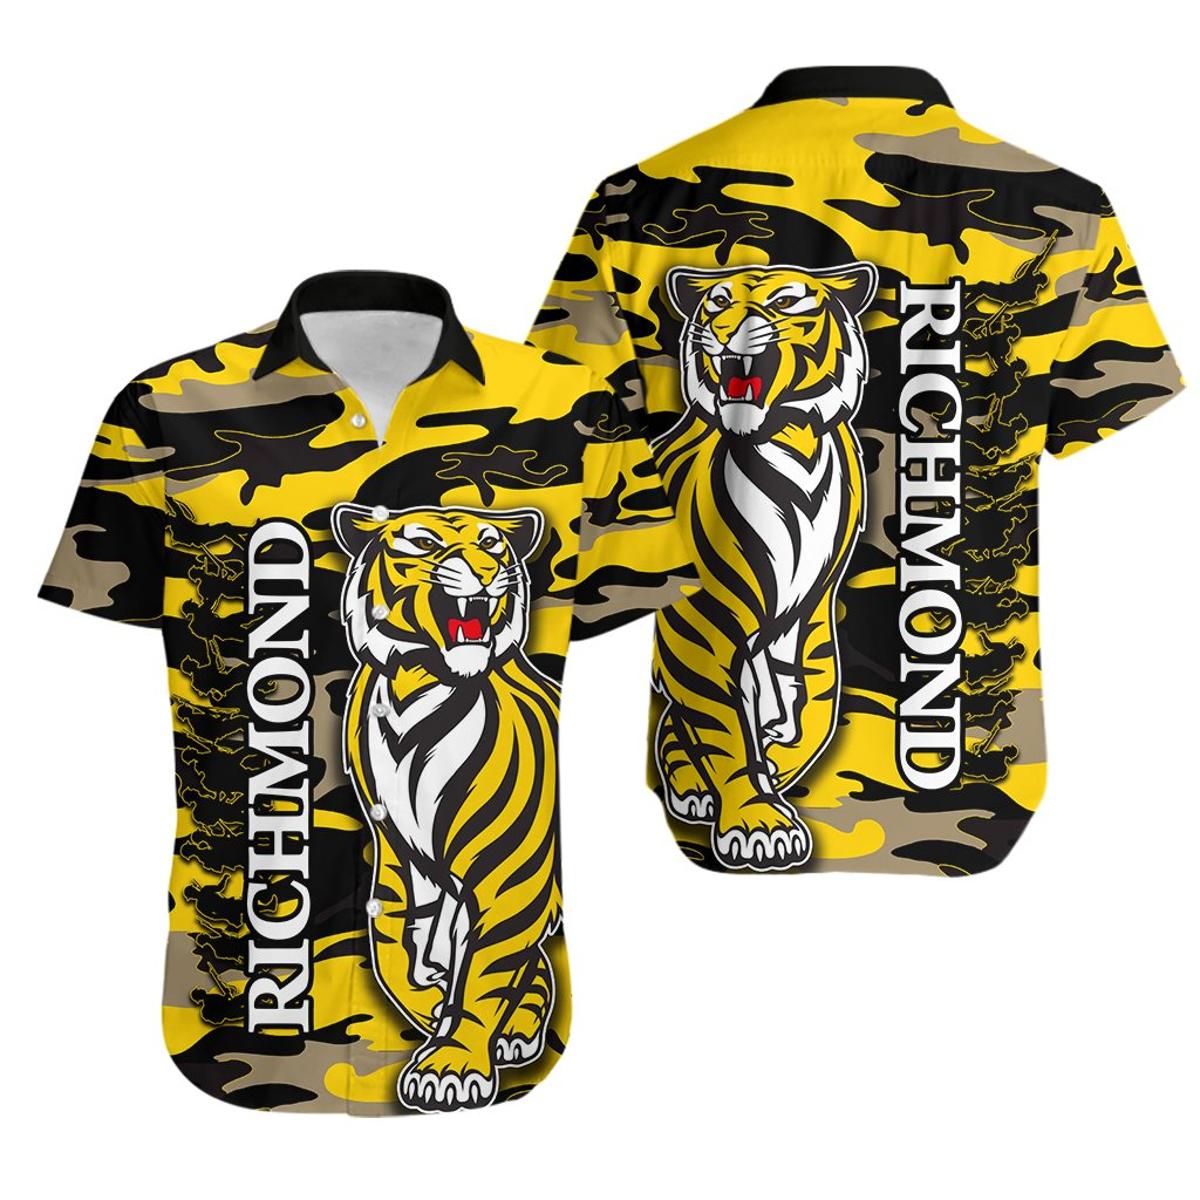 Afl Richmond Tigers Camo Patterns Vintage Hawaiian Shirt Outfit For Men